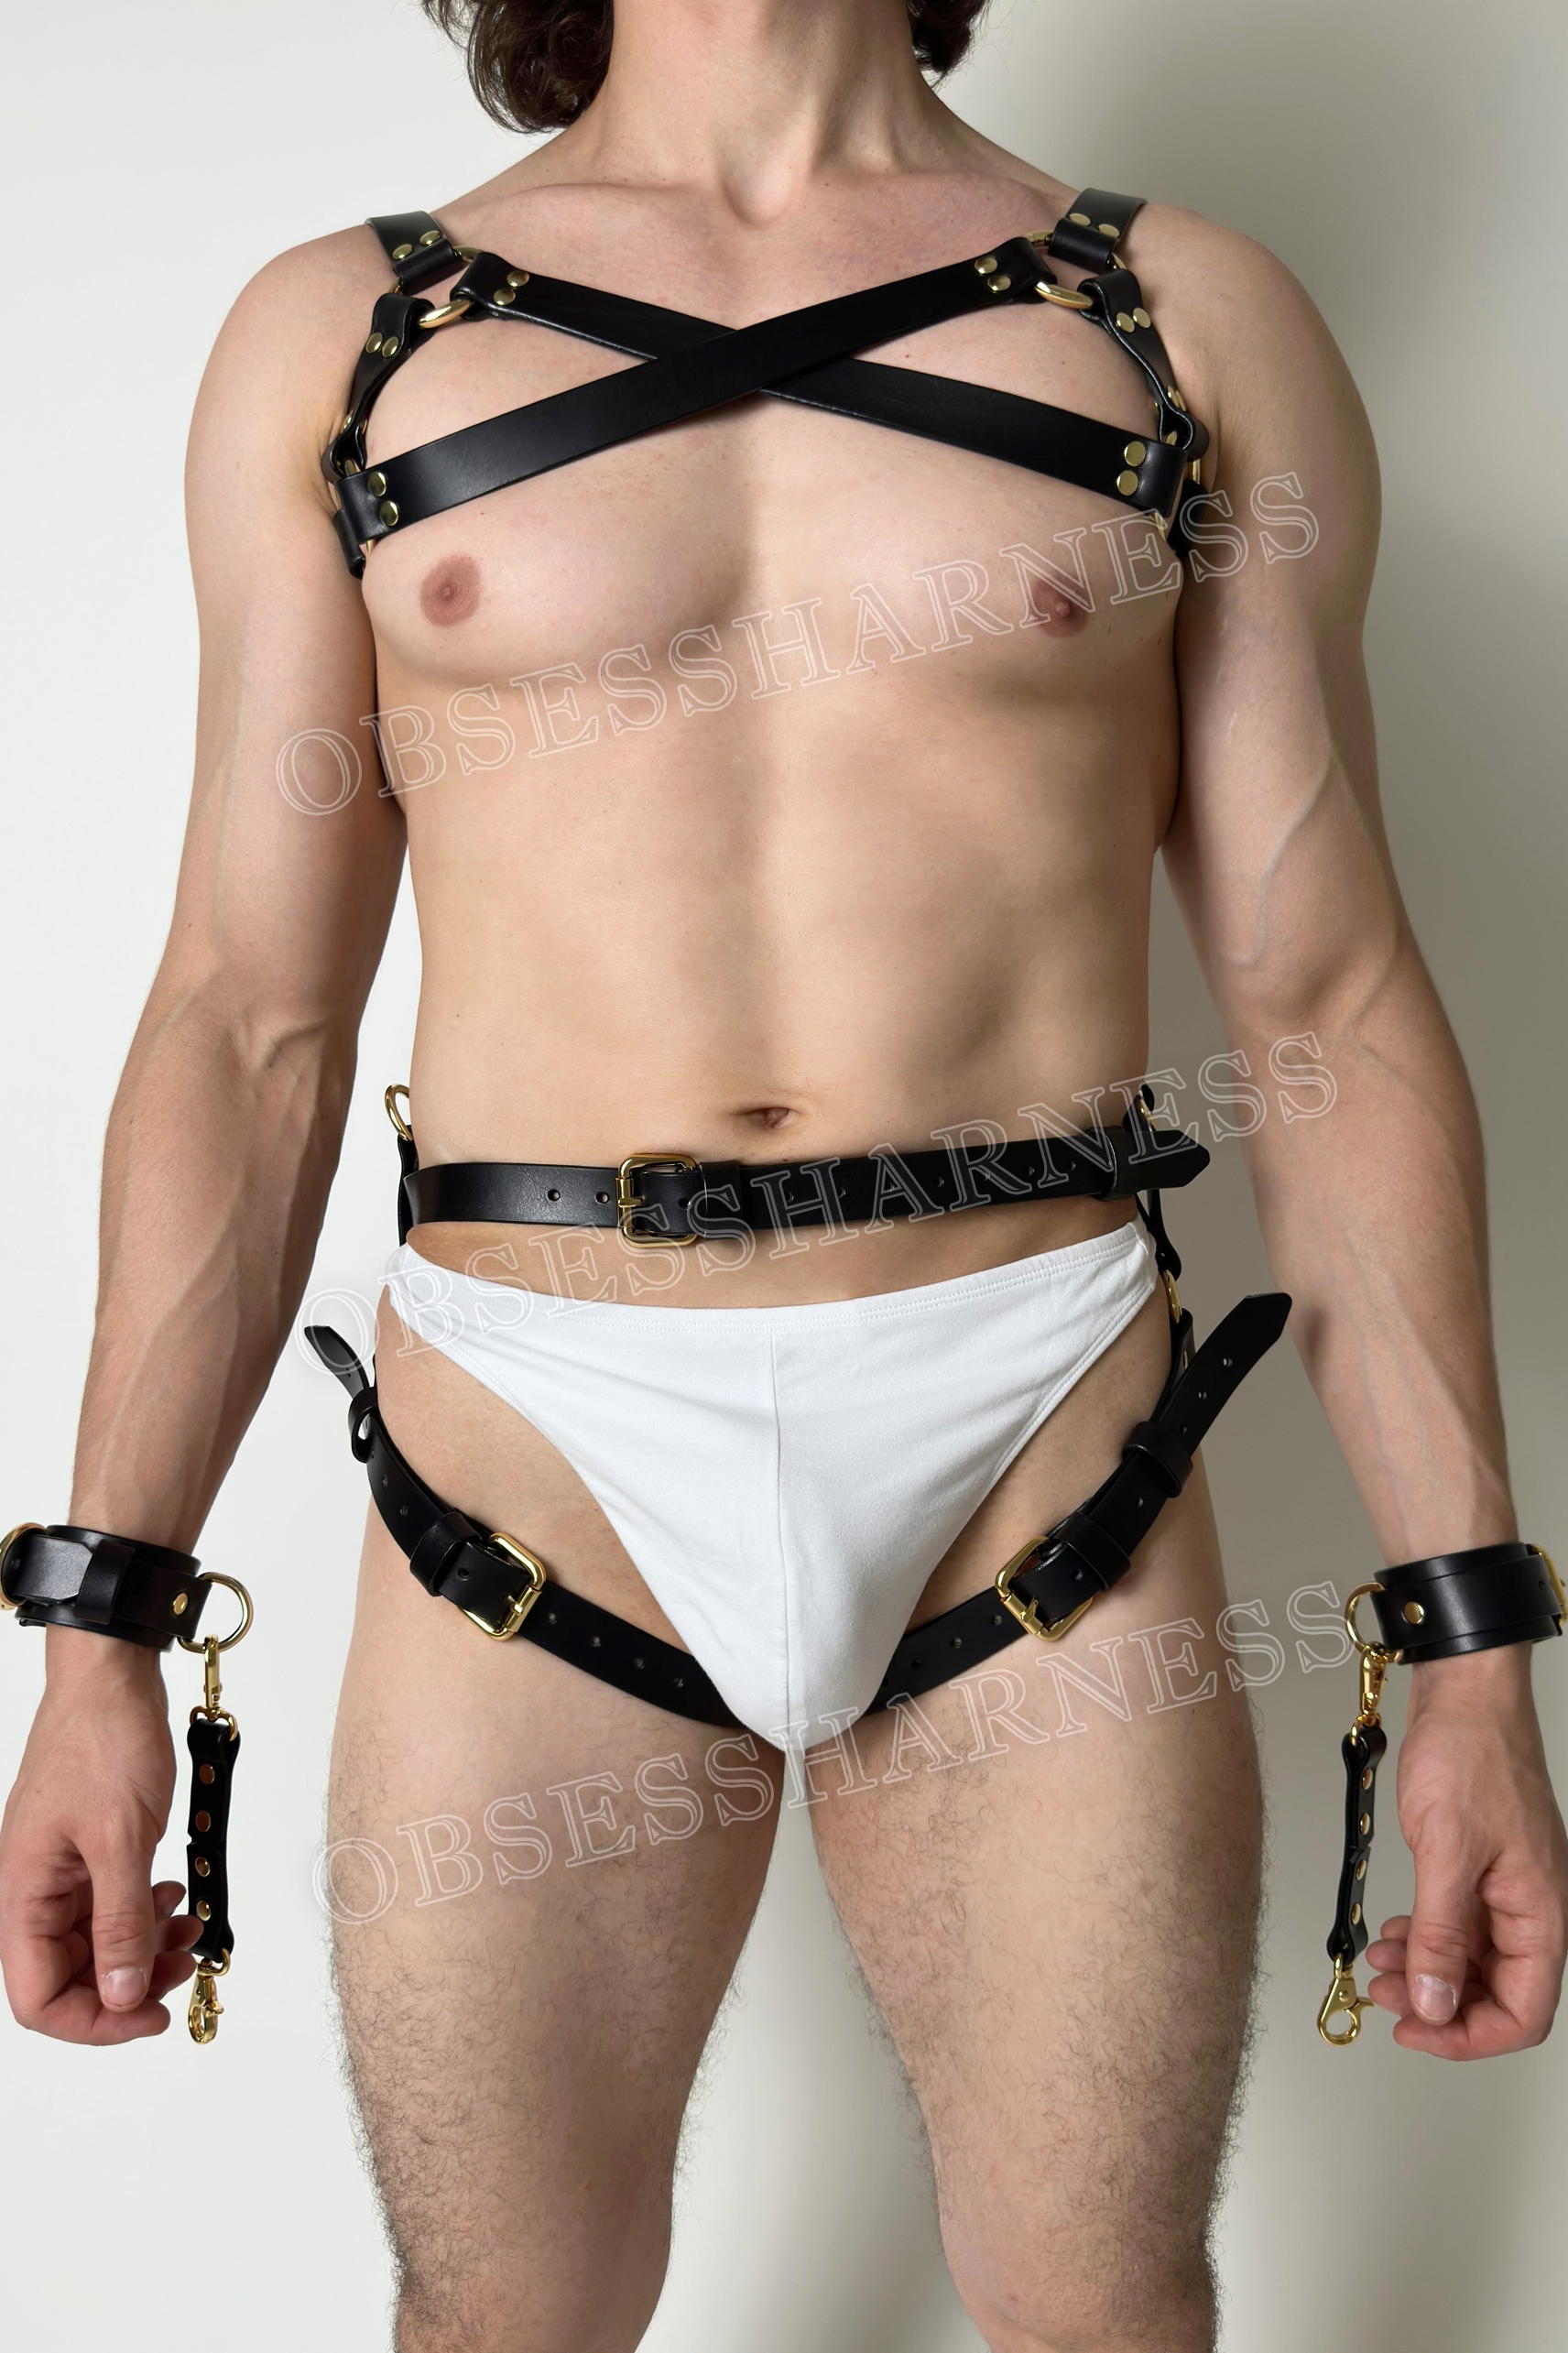 Men full body harness leather set for chest and legs? equipped with double sided cuffs